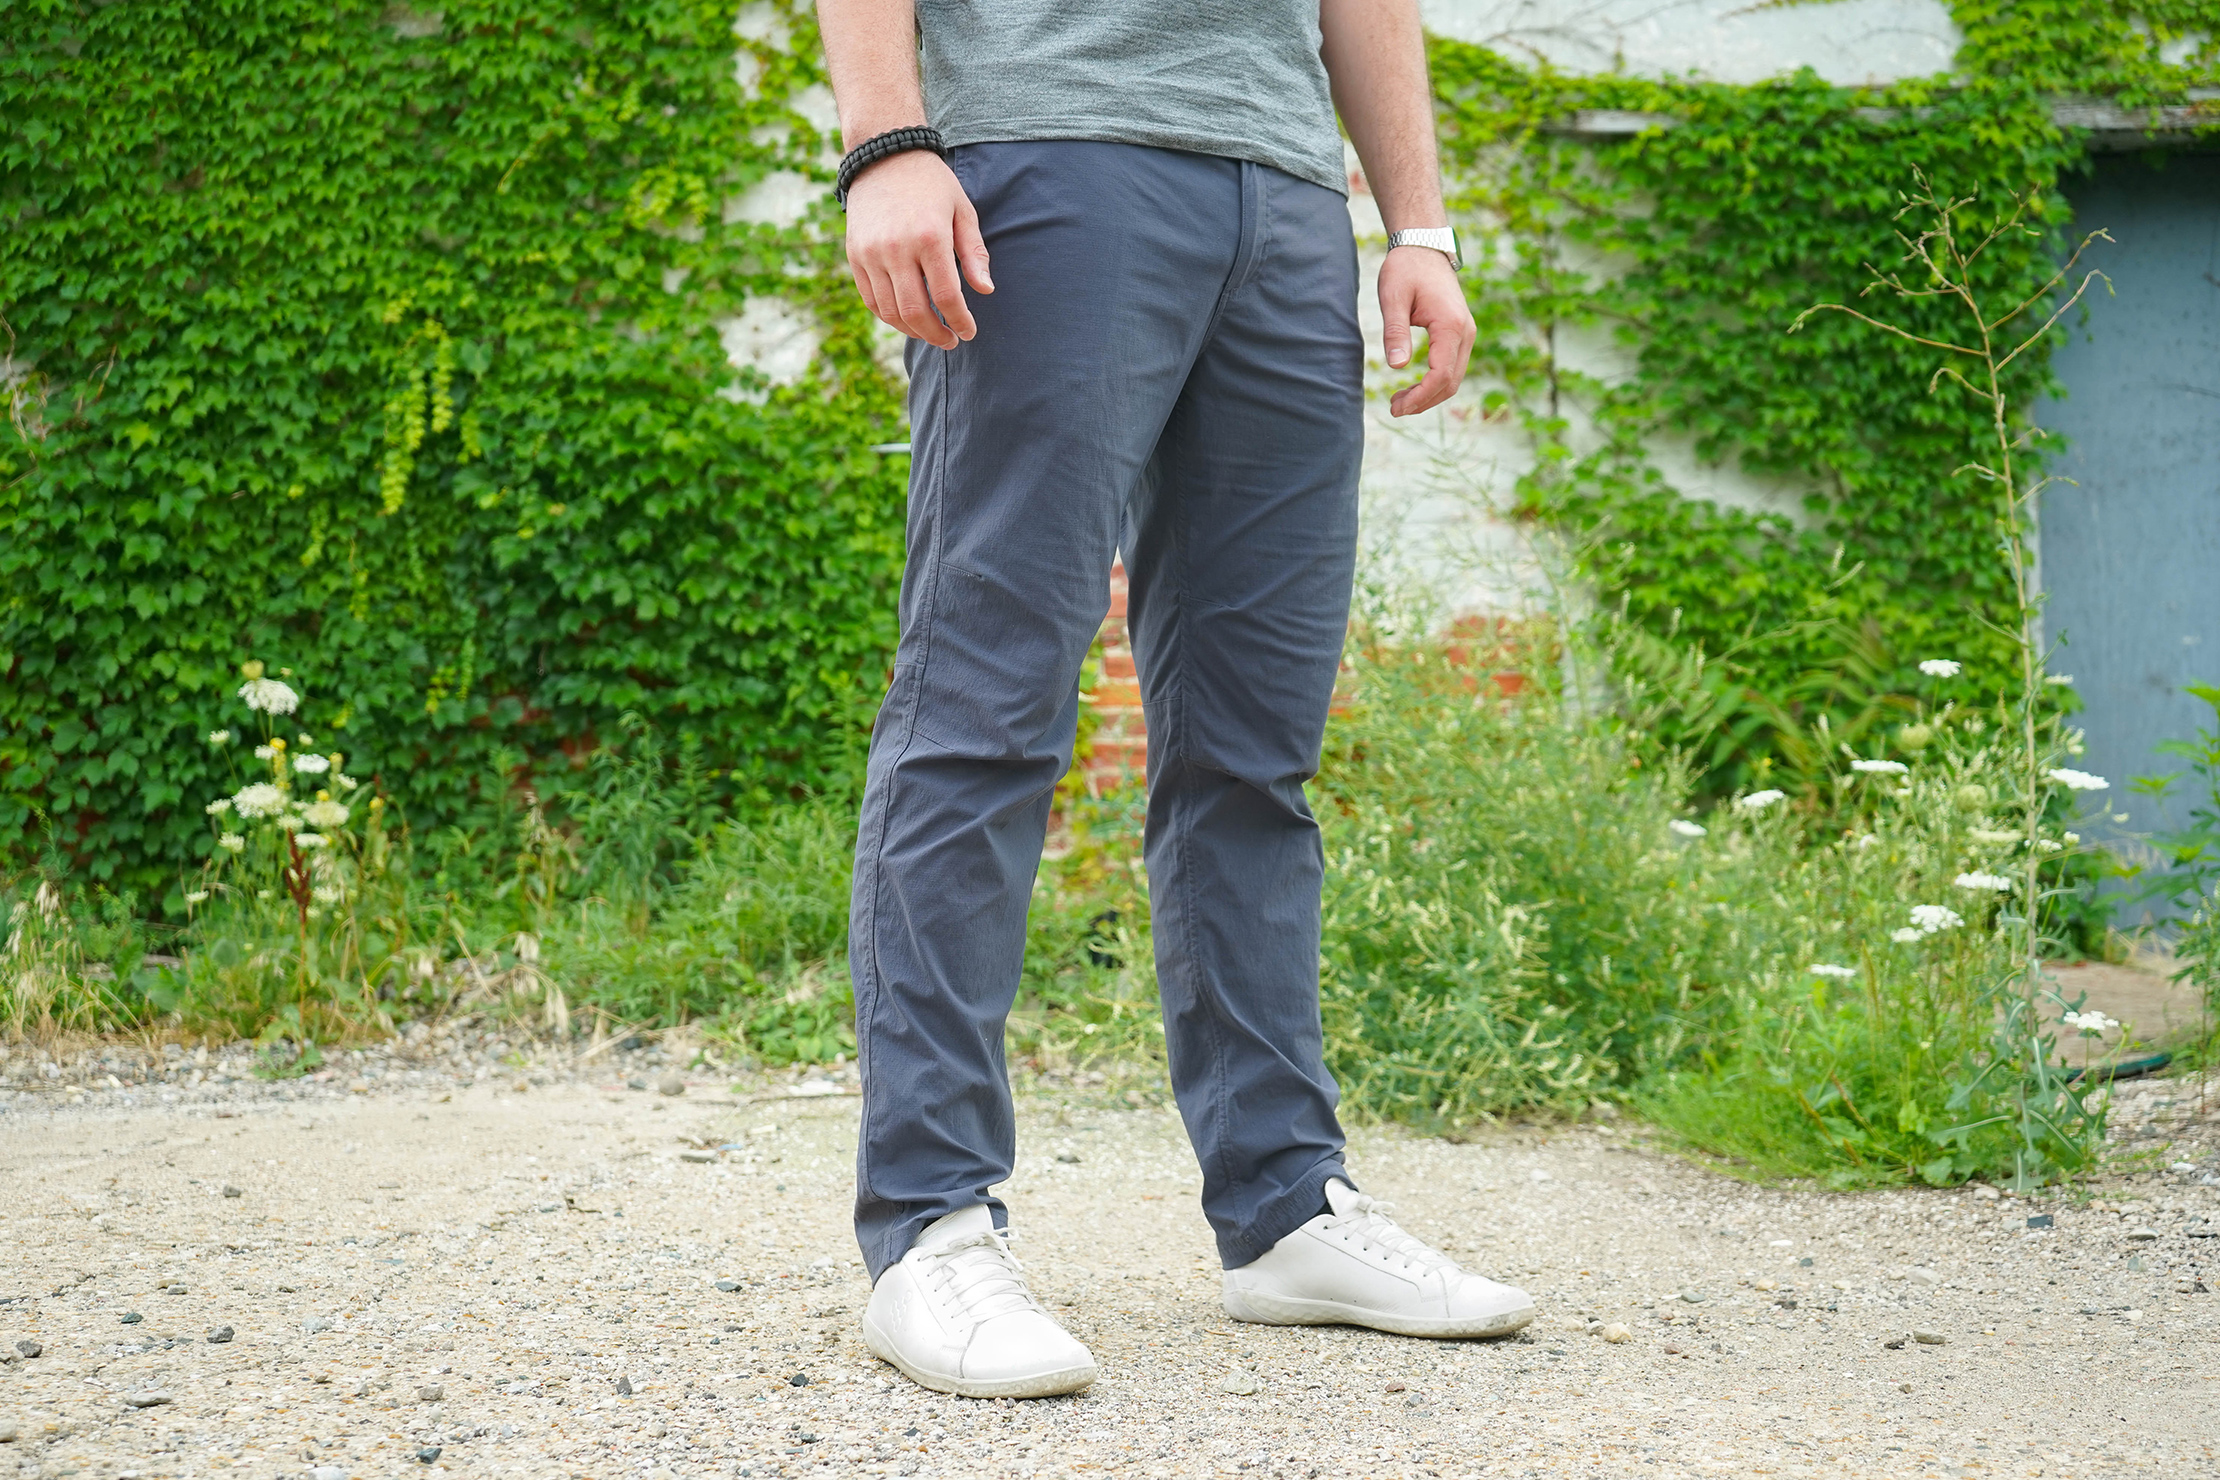 Olivers Compass Pant Review